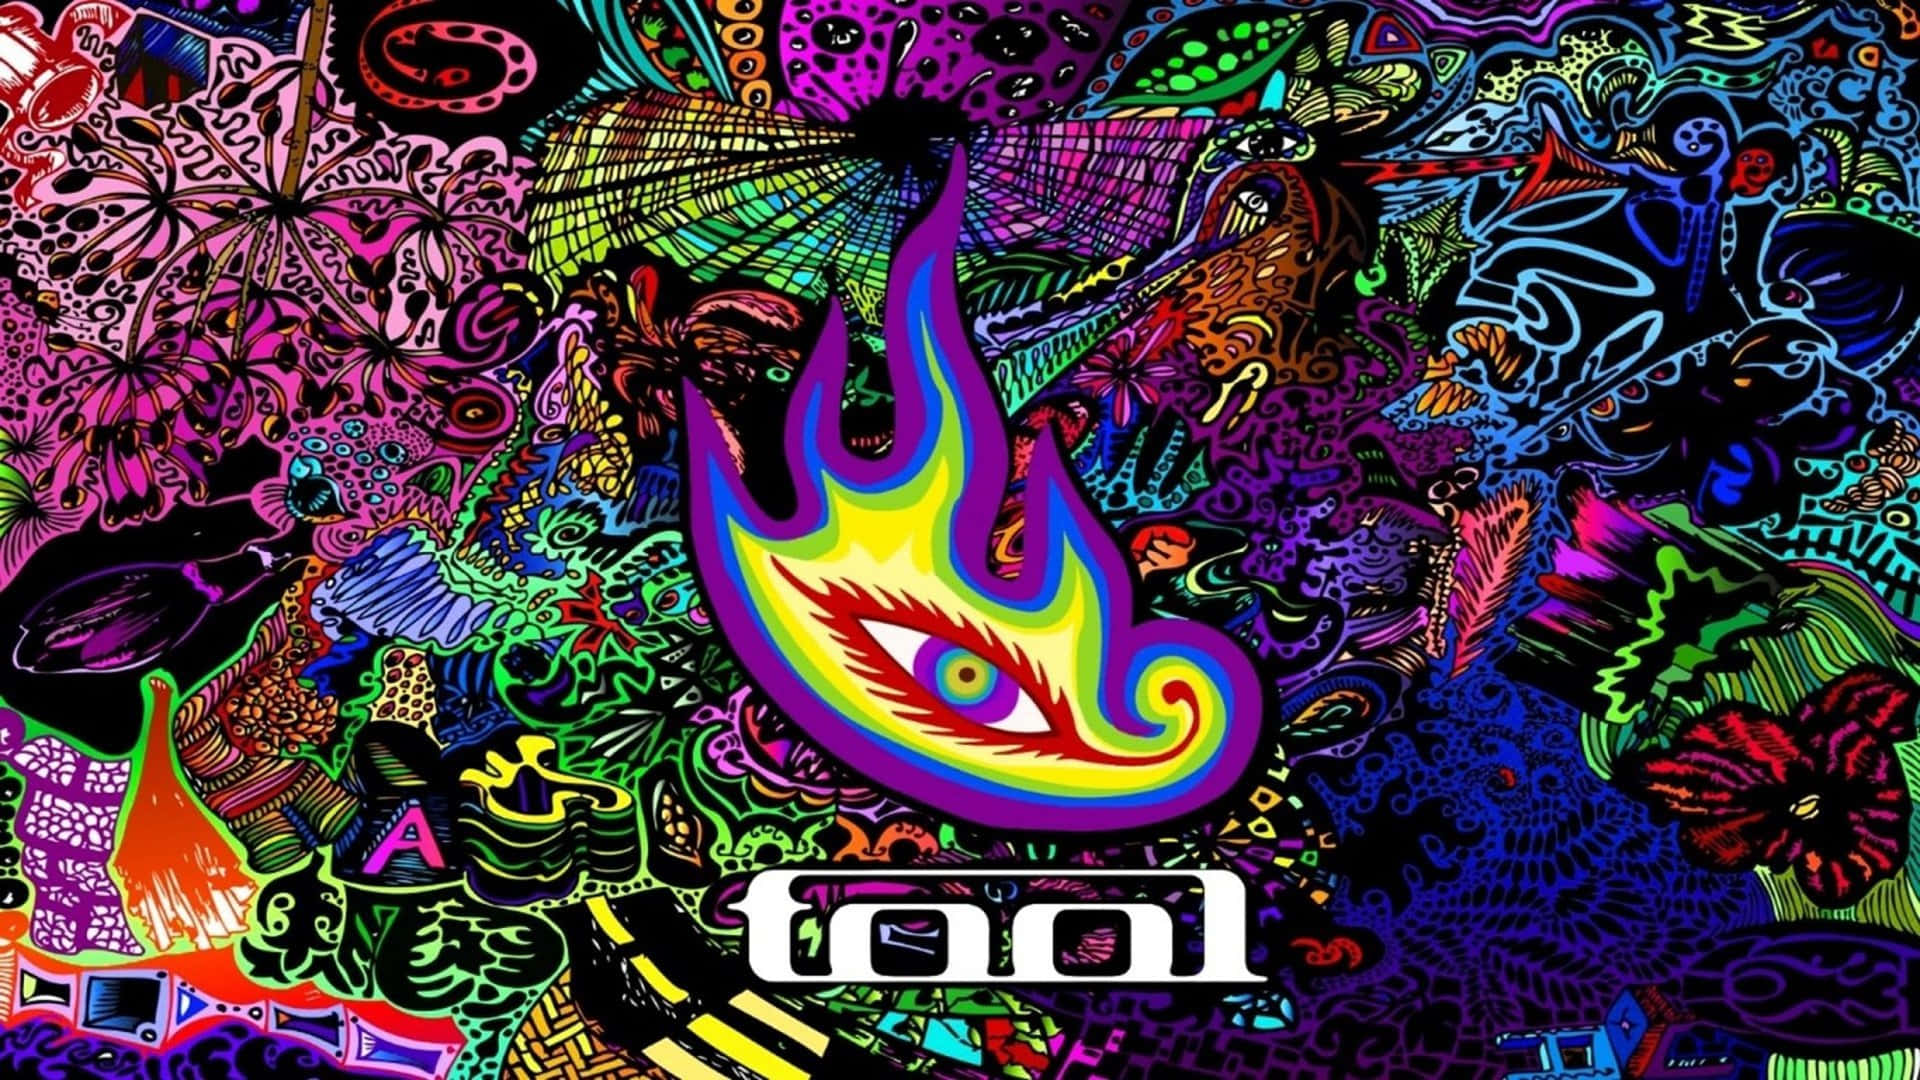 "The iconic American prog-rock band Tool performing on stage, enthralling fans with their unique blend of heavy metal, alternative rock and prog-rock" Wallpaper